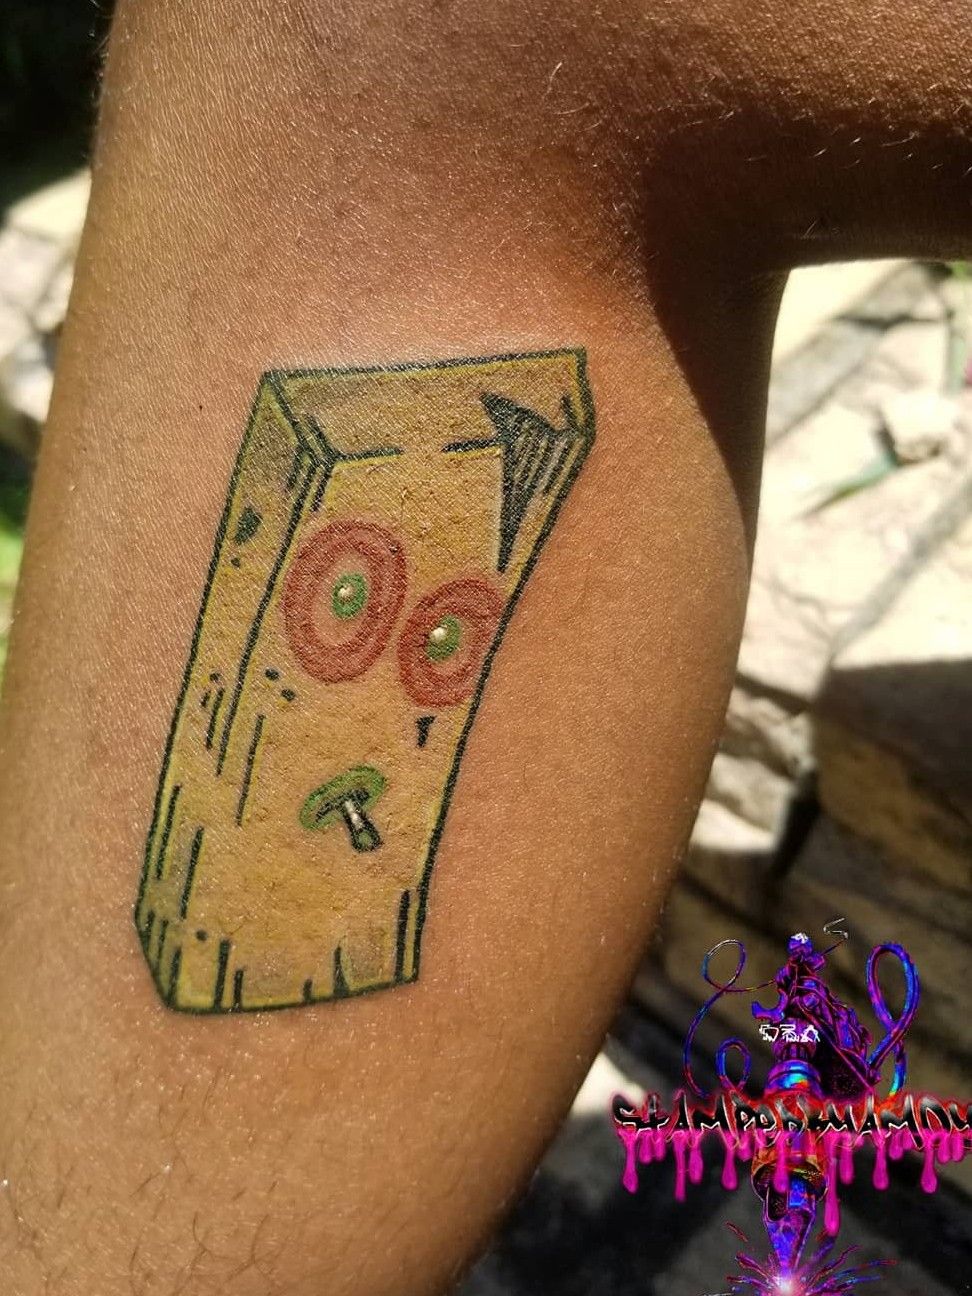 Andy pitt on Twitter jonny and plank tattoo from Ed ed and Eddy from  the other day httpstcoHRaDB3Jma6  Twitter